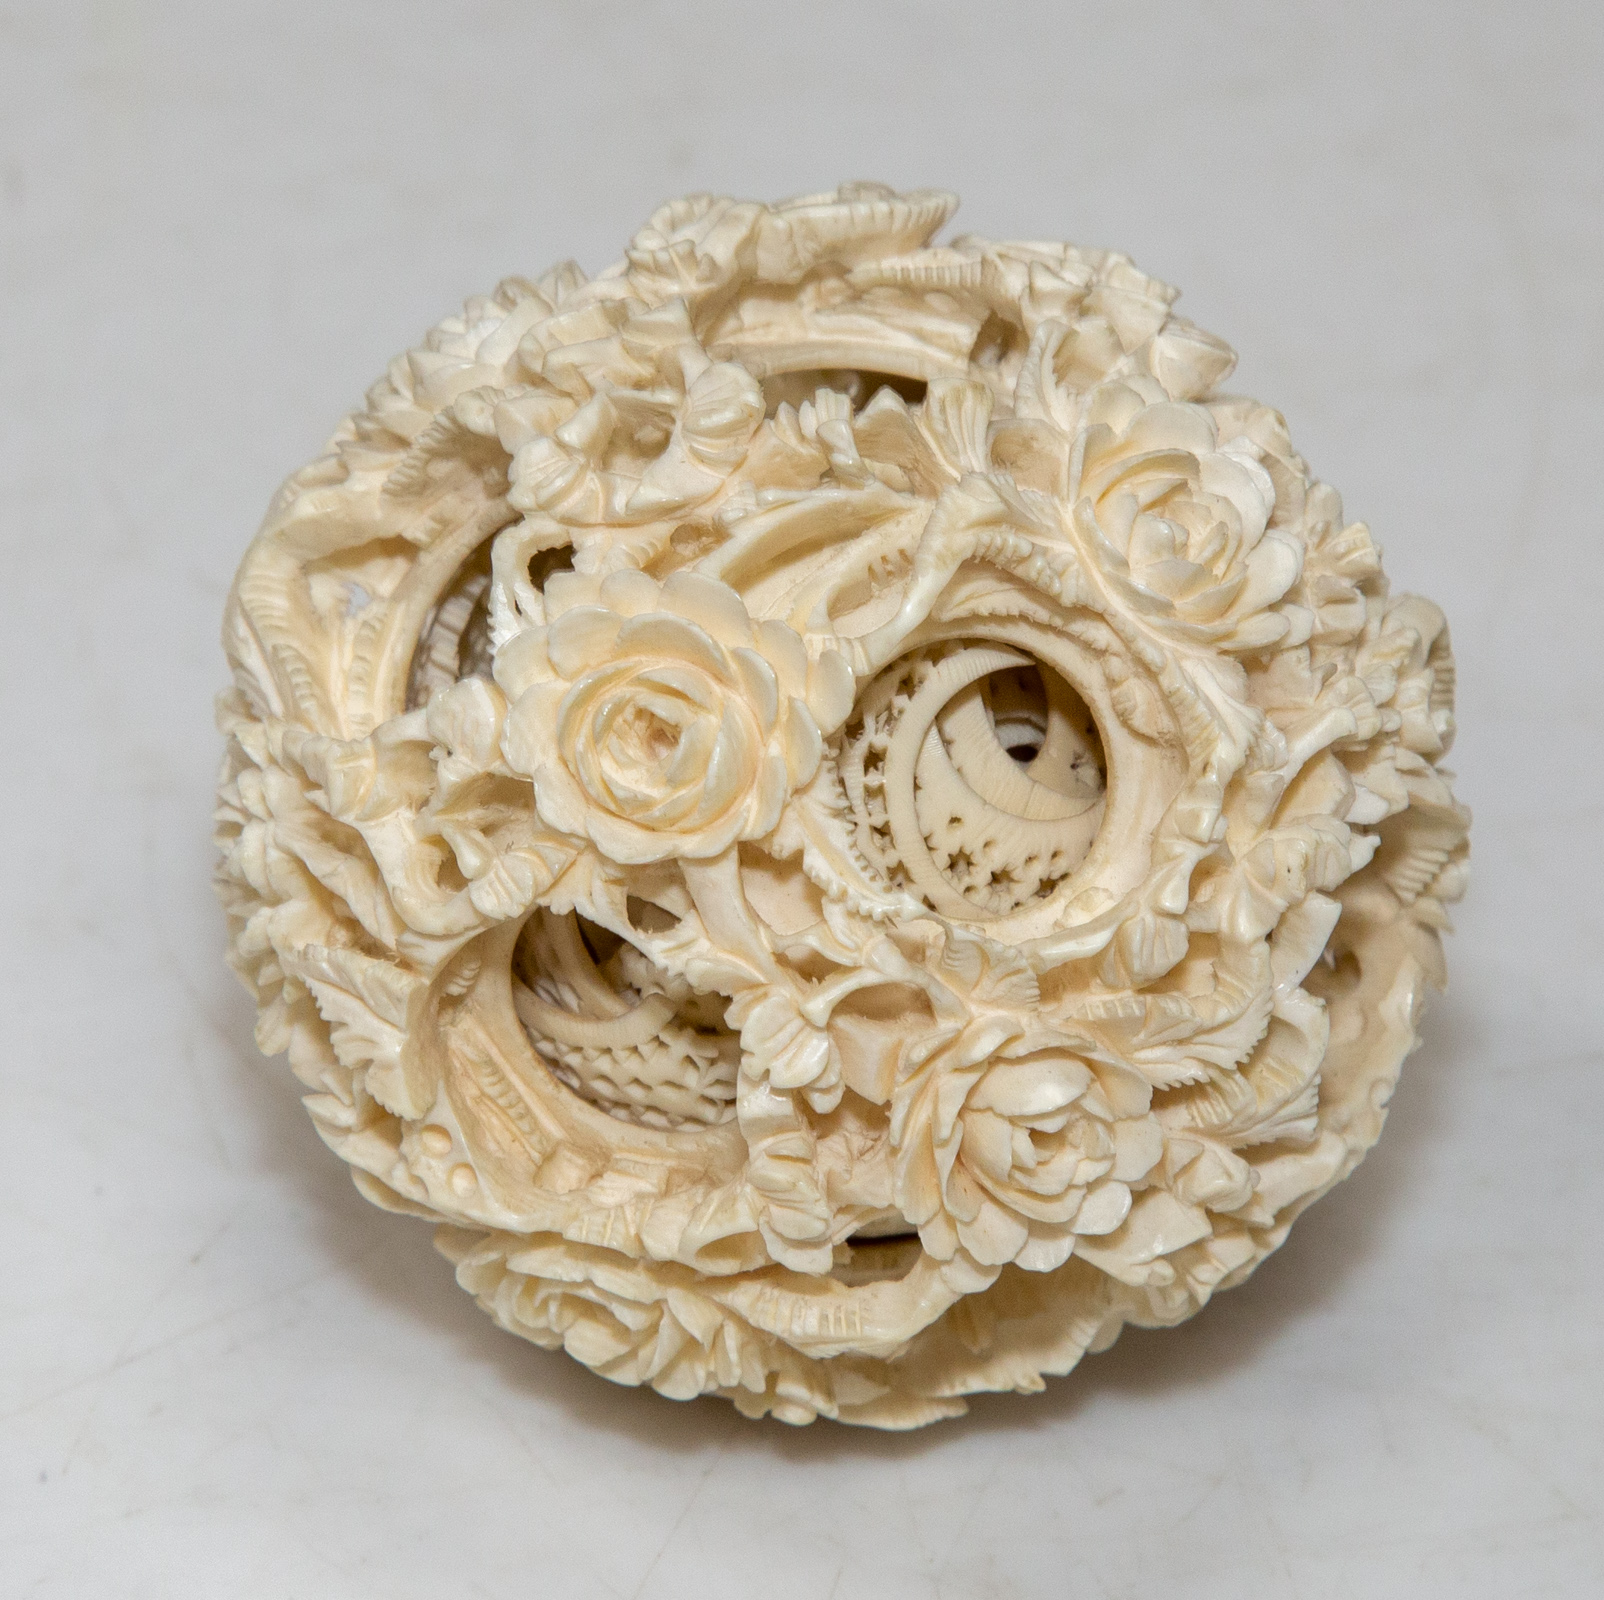 CHINESE CARVED PUZZLE BALL Elaborately 335375